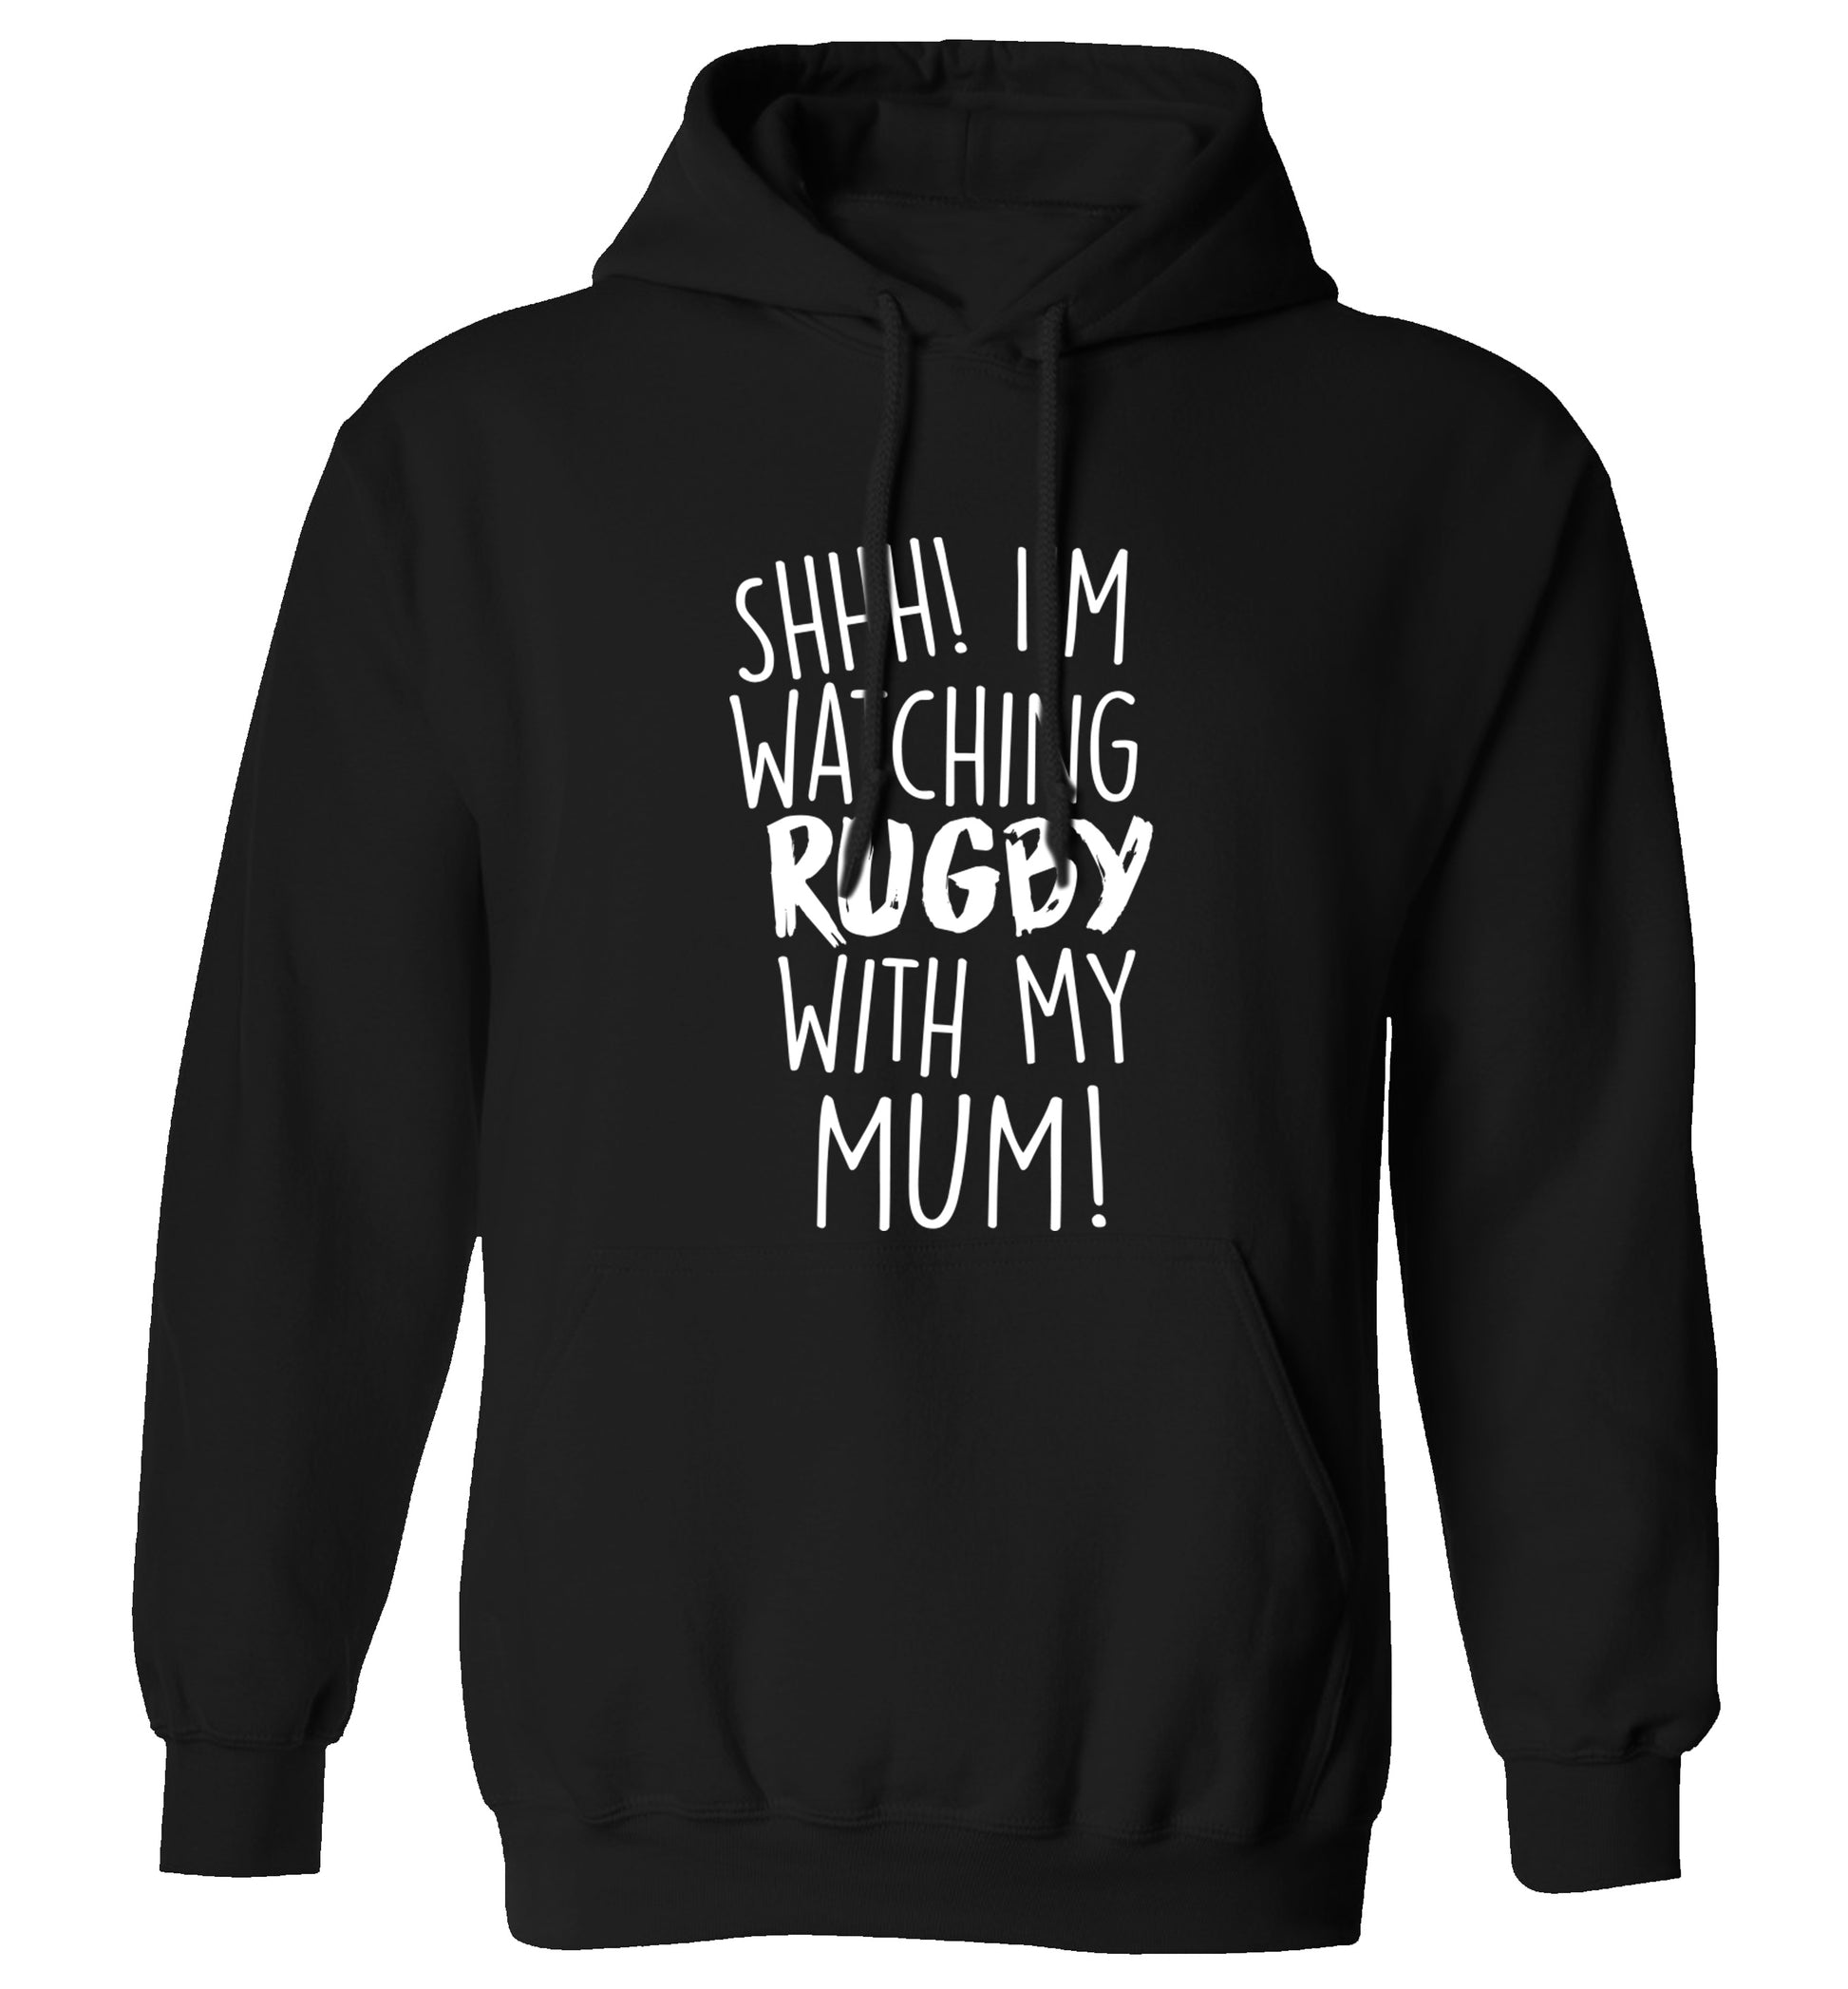 Shh... I'm watching rugby with my mum adults unisex black hoodie 2XL